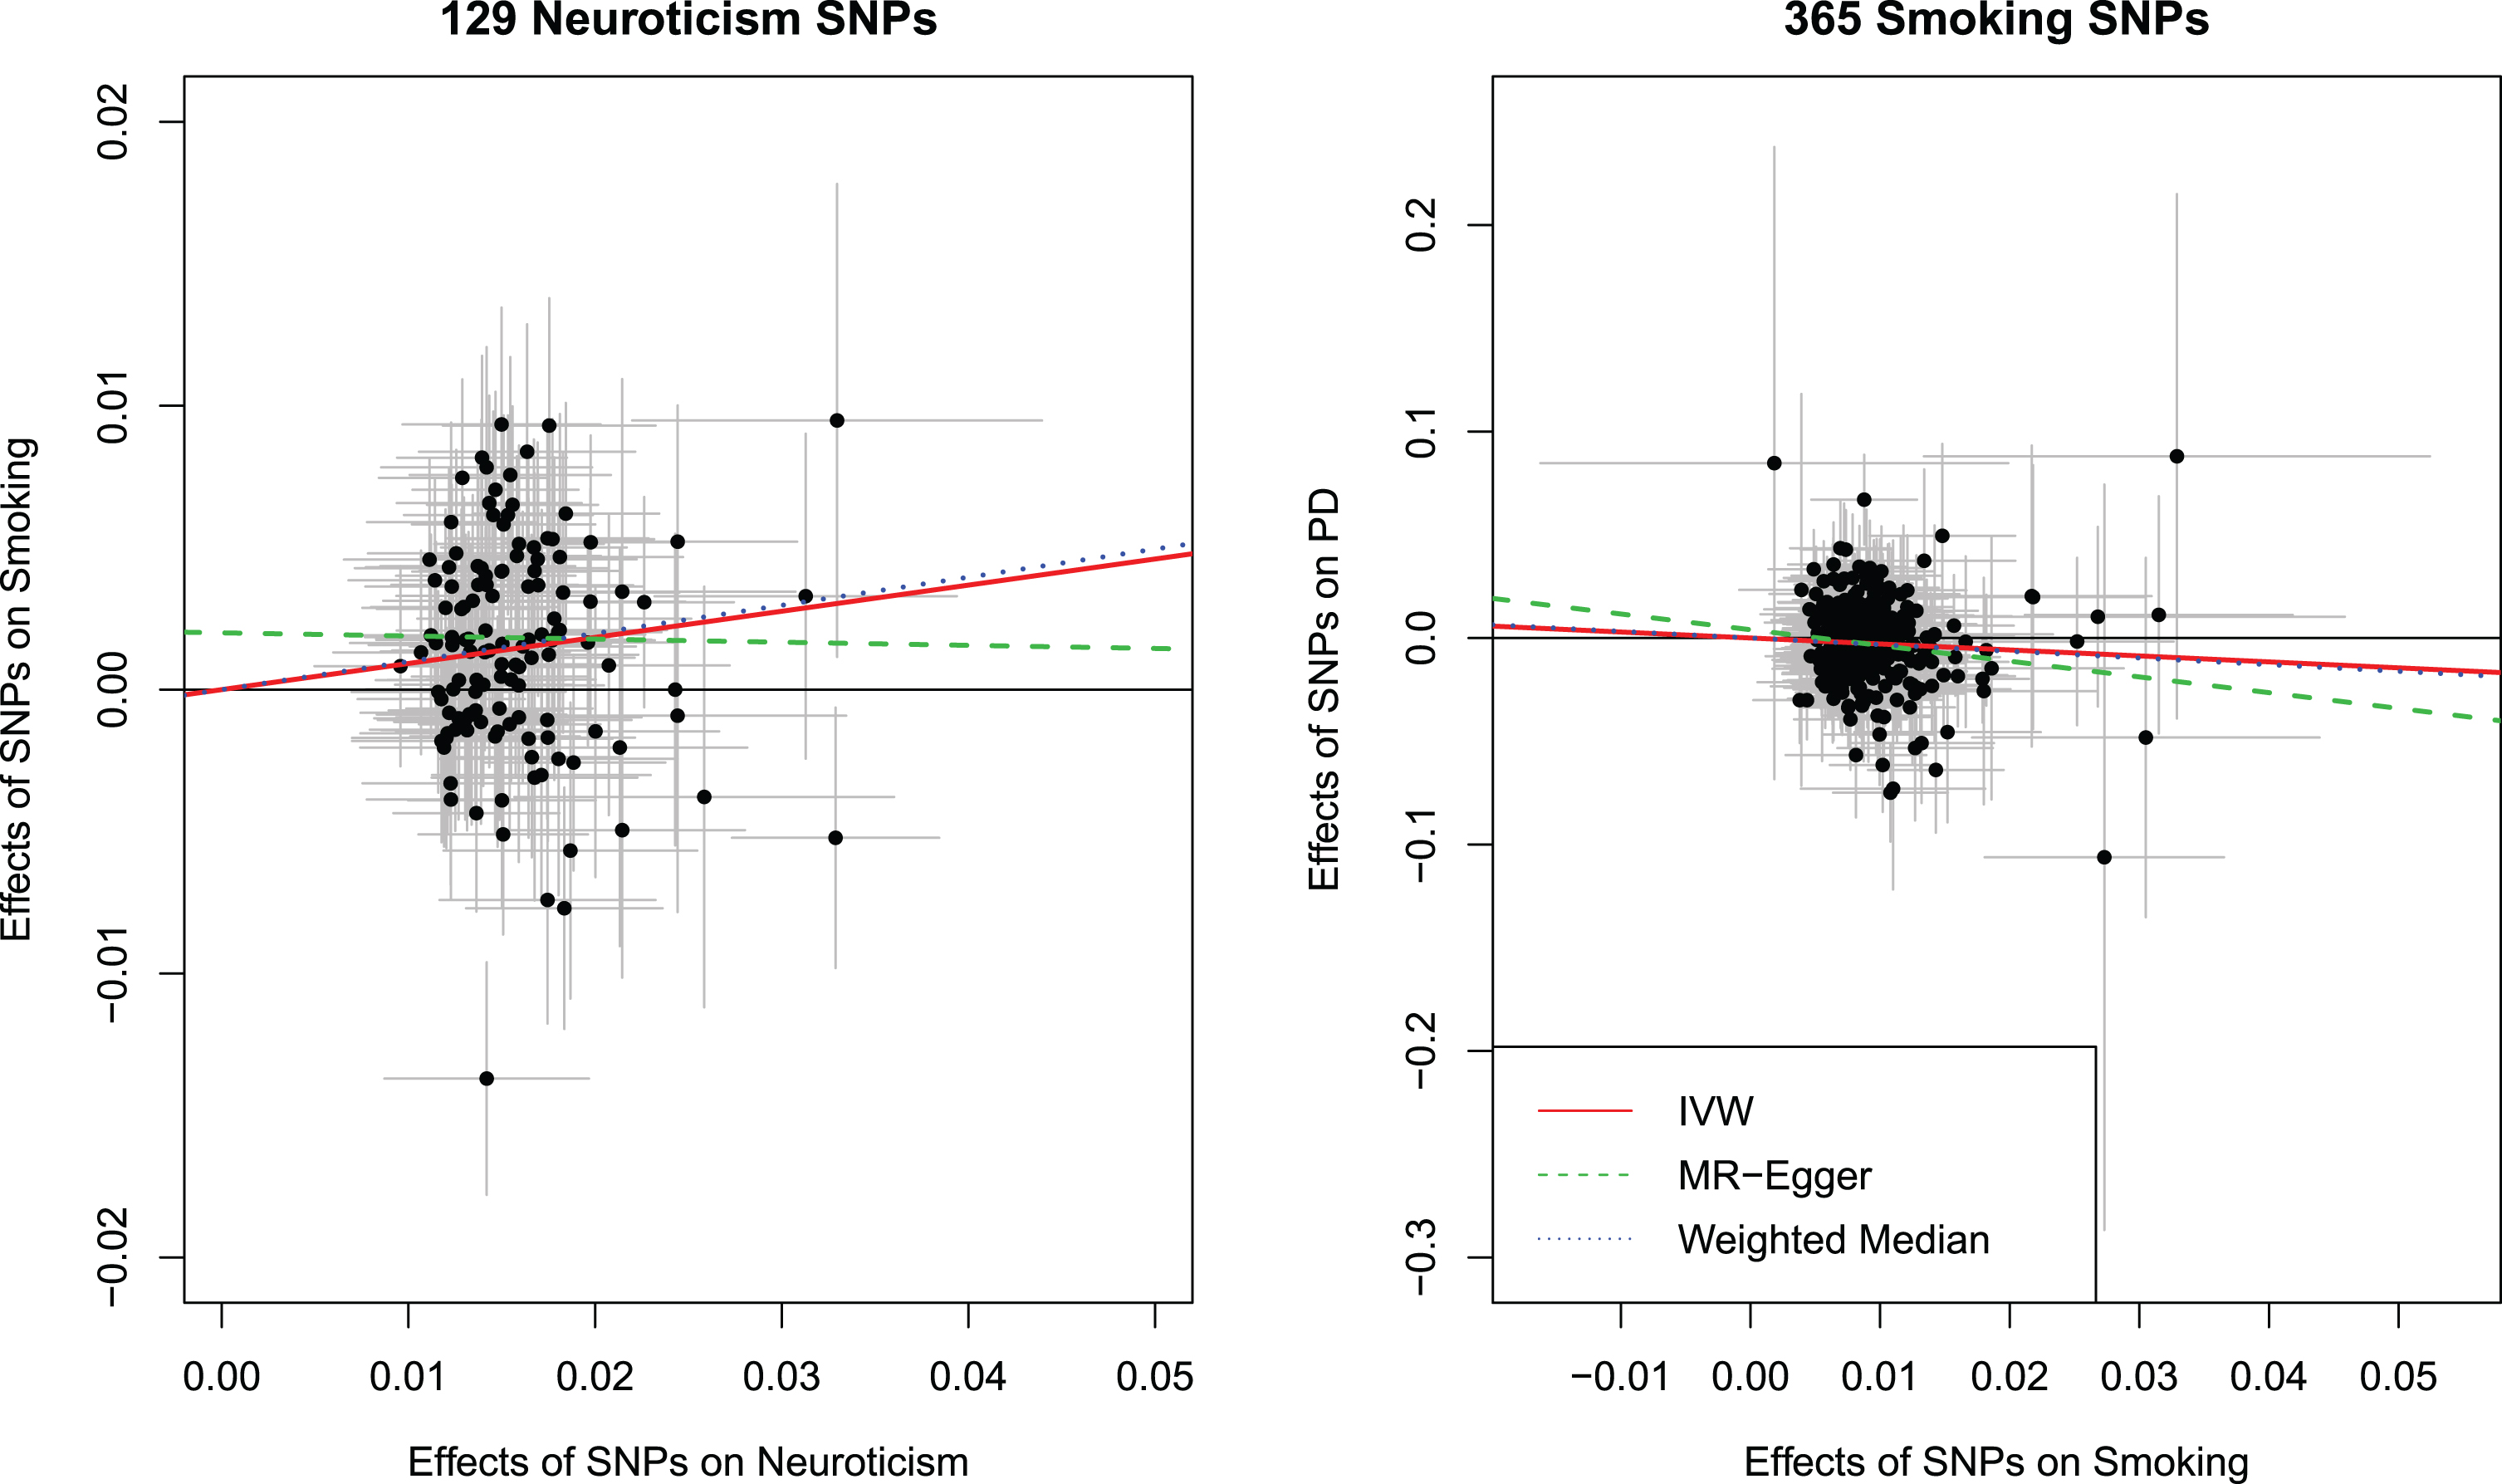 Scatter plot showing the effect estimates (with 95%confidence intervals) of SNP-neuroticism associations and SNP-Smoking Initiation associations for all 129 Neuroticism SNPs (left panel). Scatter plot showing the effect estimates (with 95%confidence intervals) of SNP-smoking initiation associations and SNP-PD risk associations for all 365 smoking initiation SNPs (right panel). Lines represent the three Mendelian randomization estimates. IVW, inverse variance weighted method; SNP, single nucleotide polymorphism; PD, Parkinson’s disease; OR, odds ratio; CI, confidence interval.